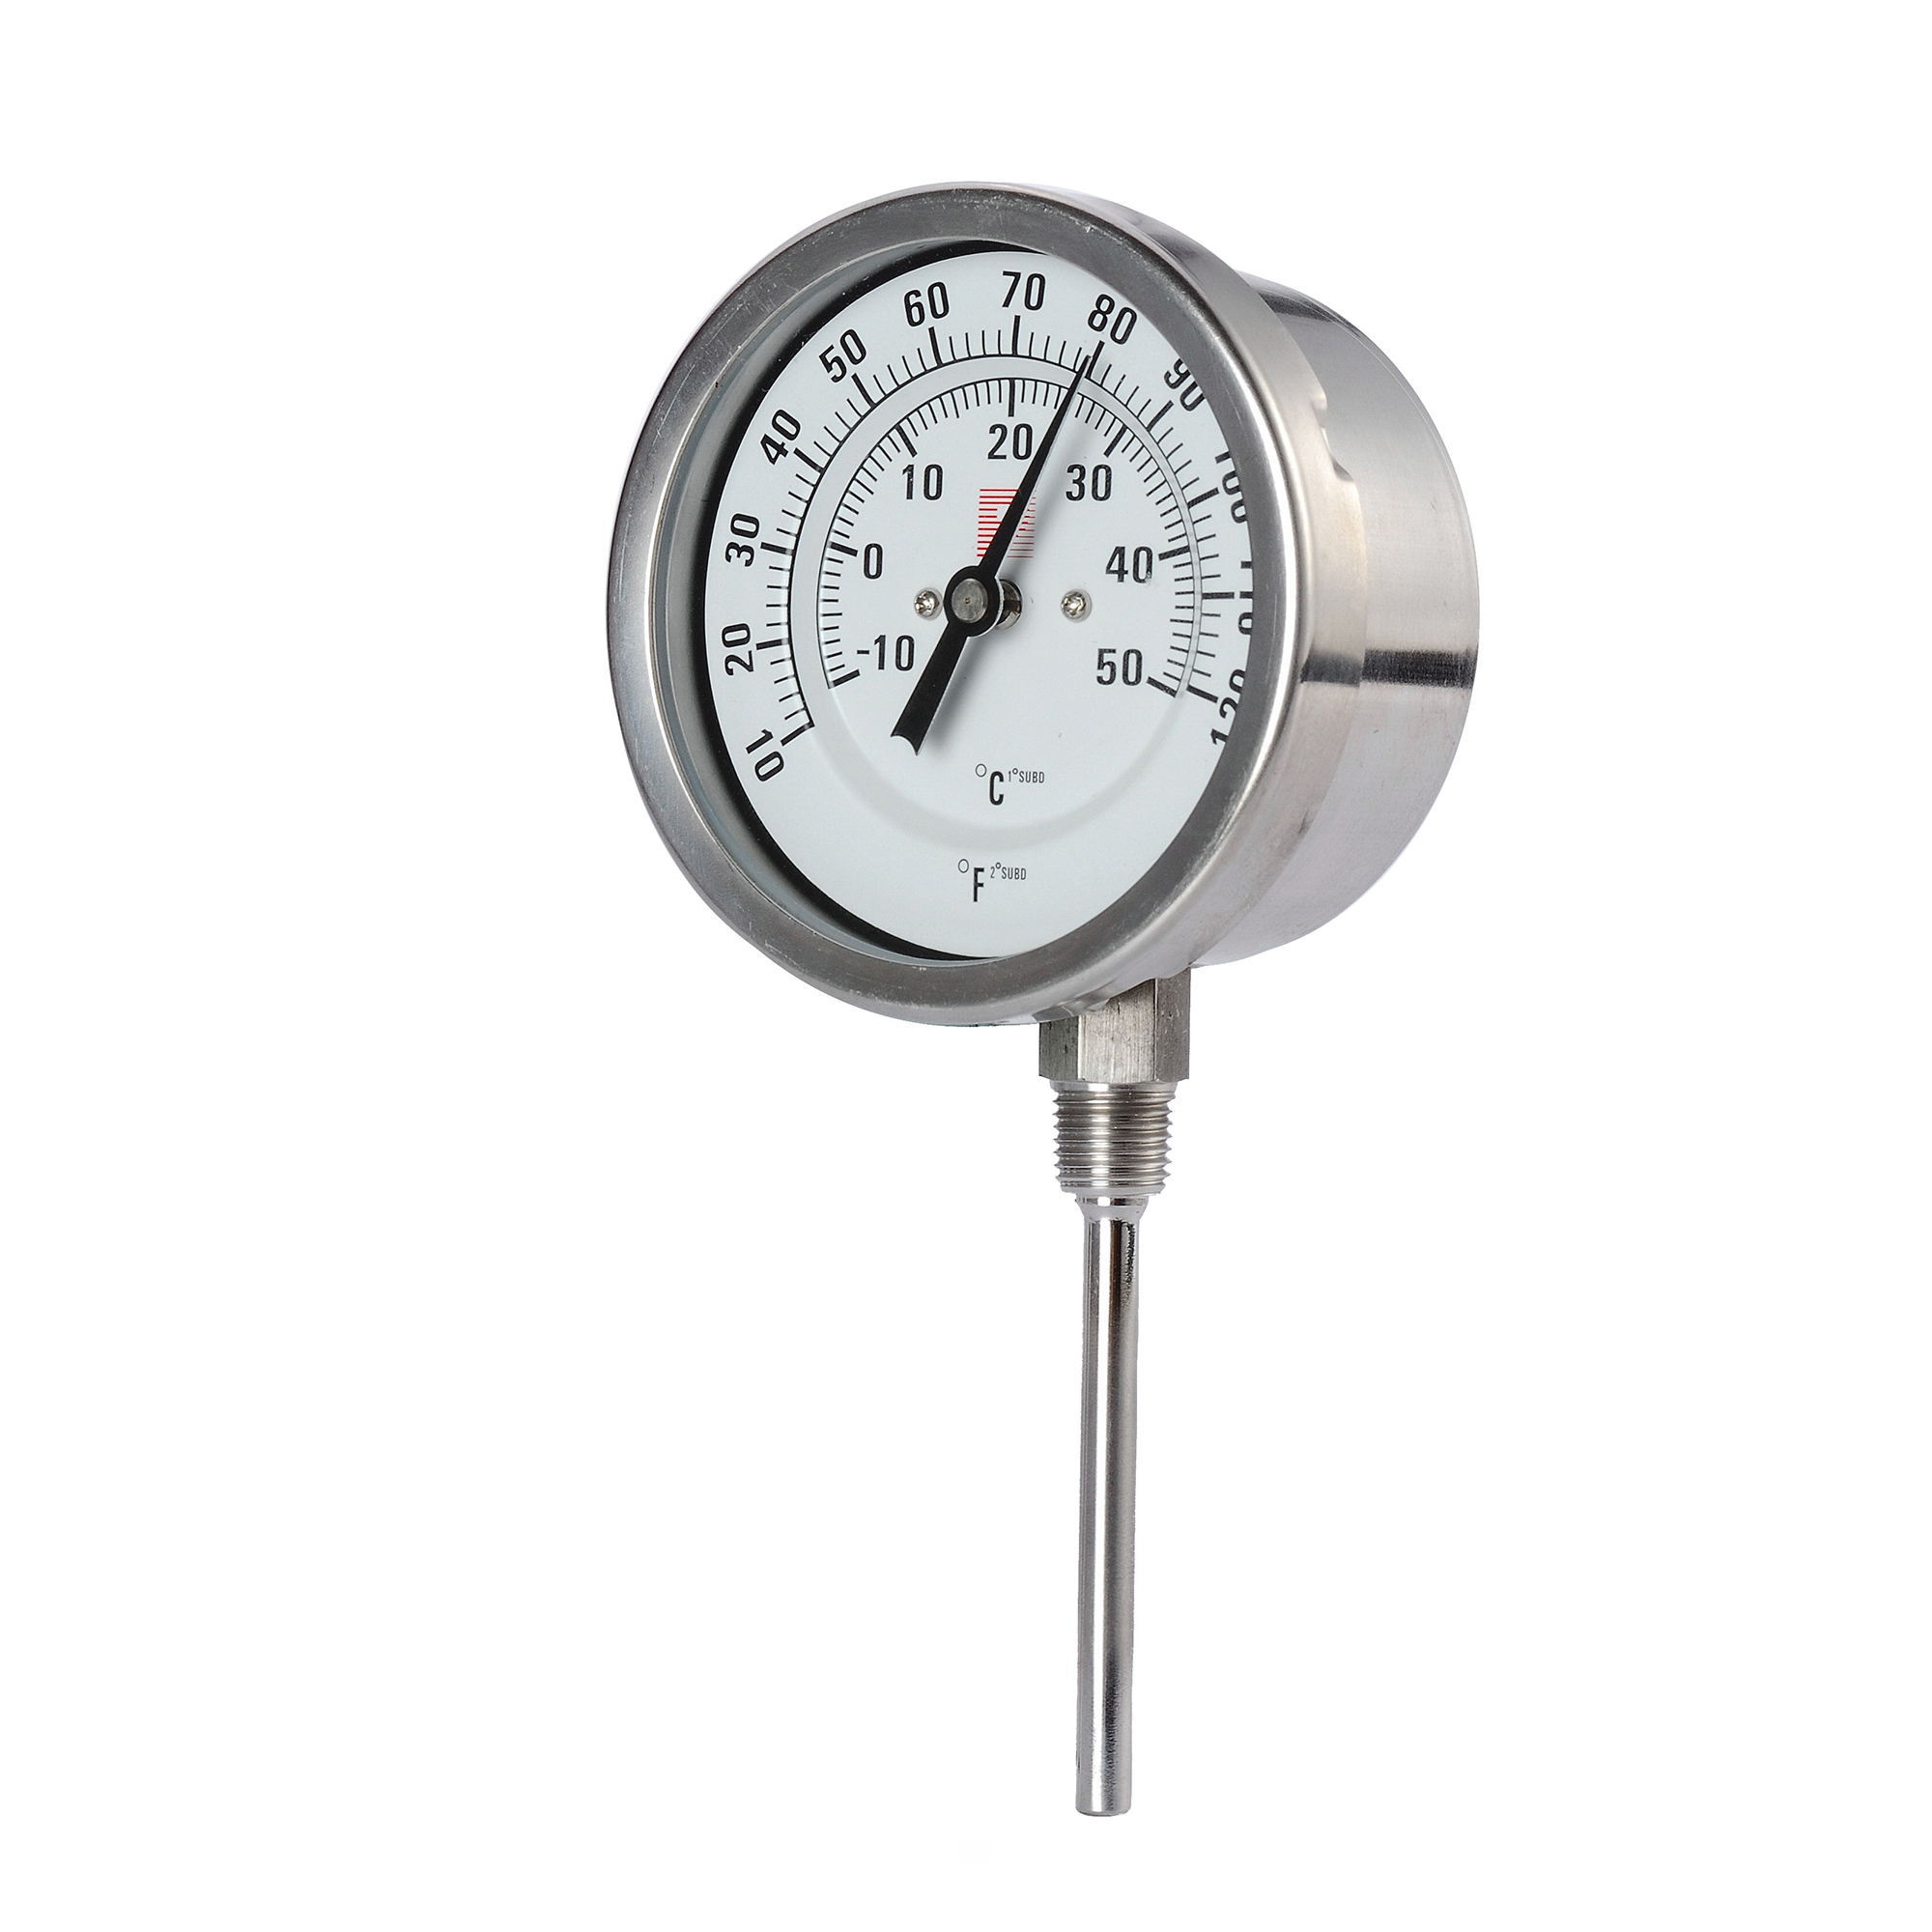 Stainless steel bimetal Thermometer